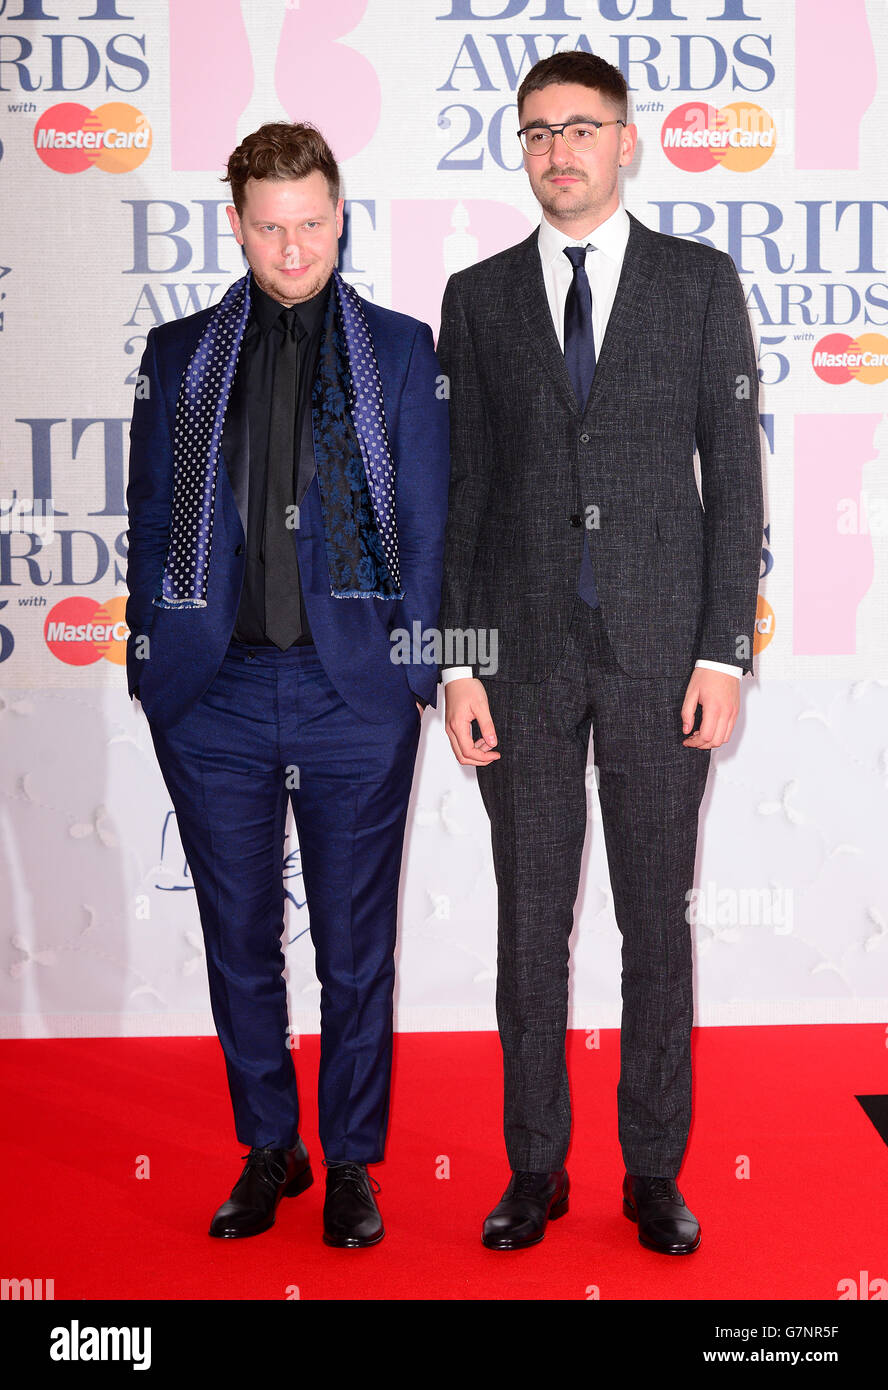 Joe Newman and Gus Unger-Hamilton of Alt-J arriving for the 2015 Brit Awards at the O2 Arena, London. PRESS ASSOCIATION Photo. Picture date: Wednesday February 25, 2015. See PA story SHOWBIZ Brits. Photo credit should read: Dominic Lipinski/PA Wire Stock Photo